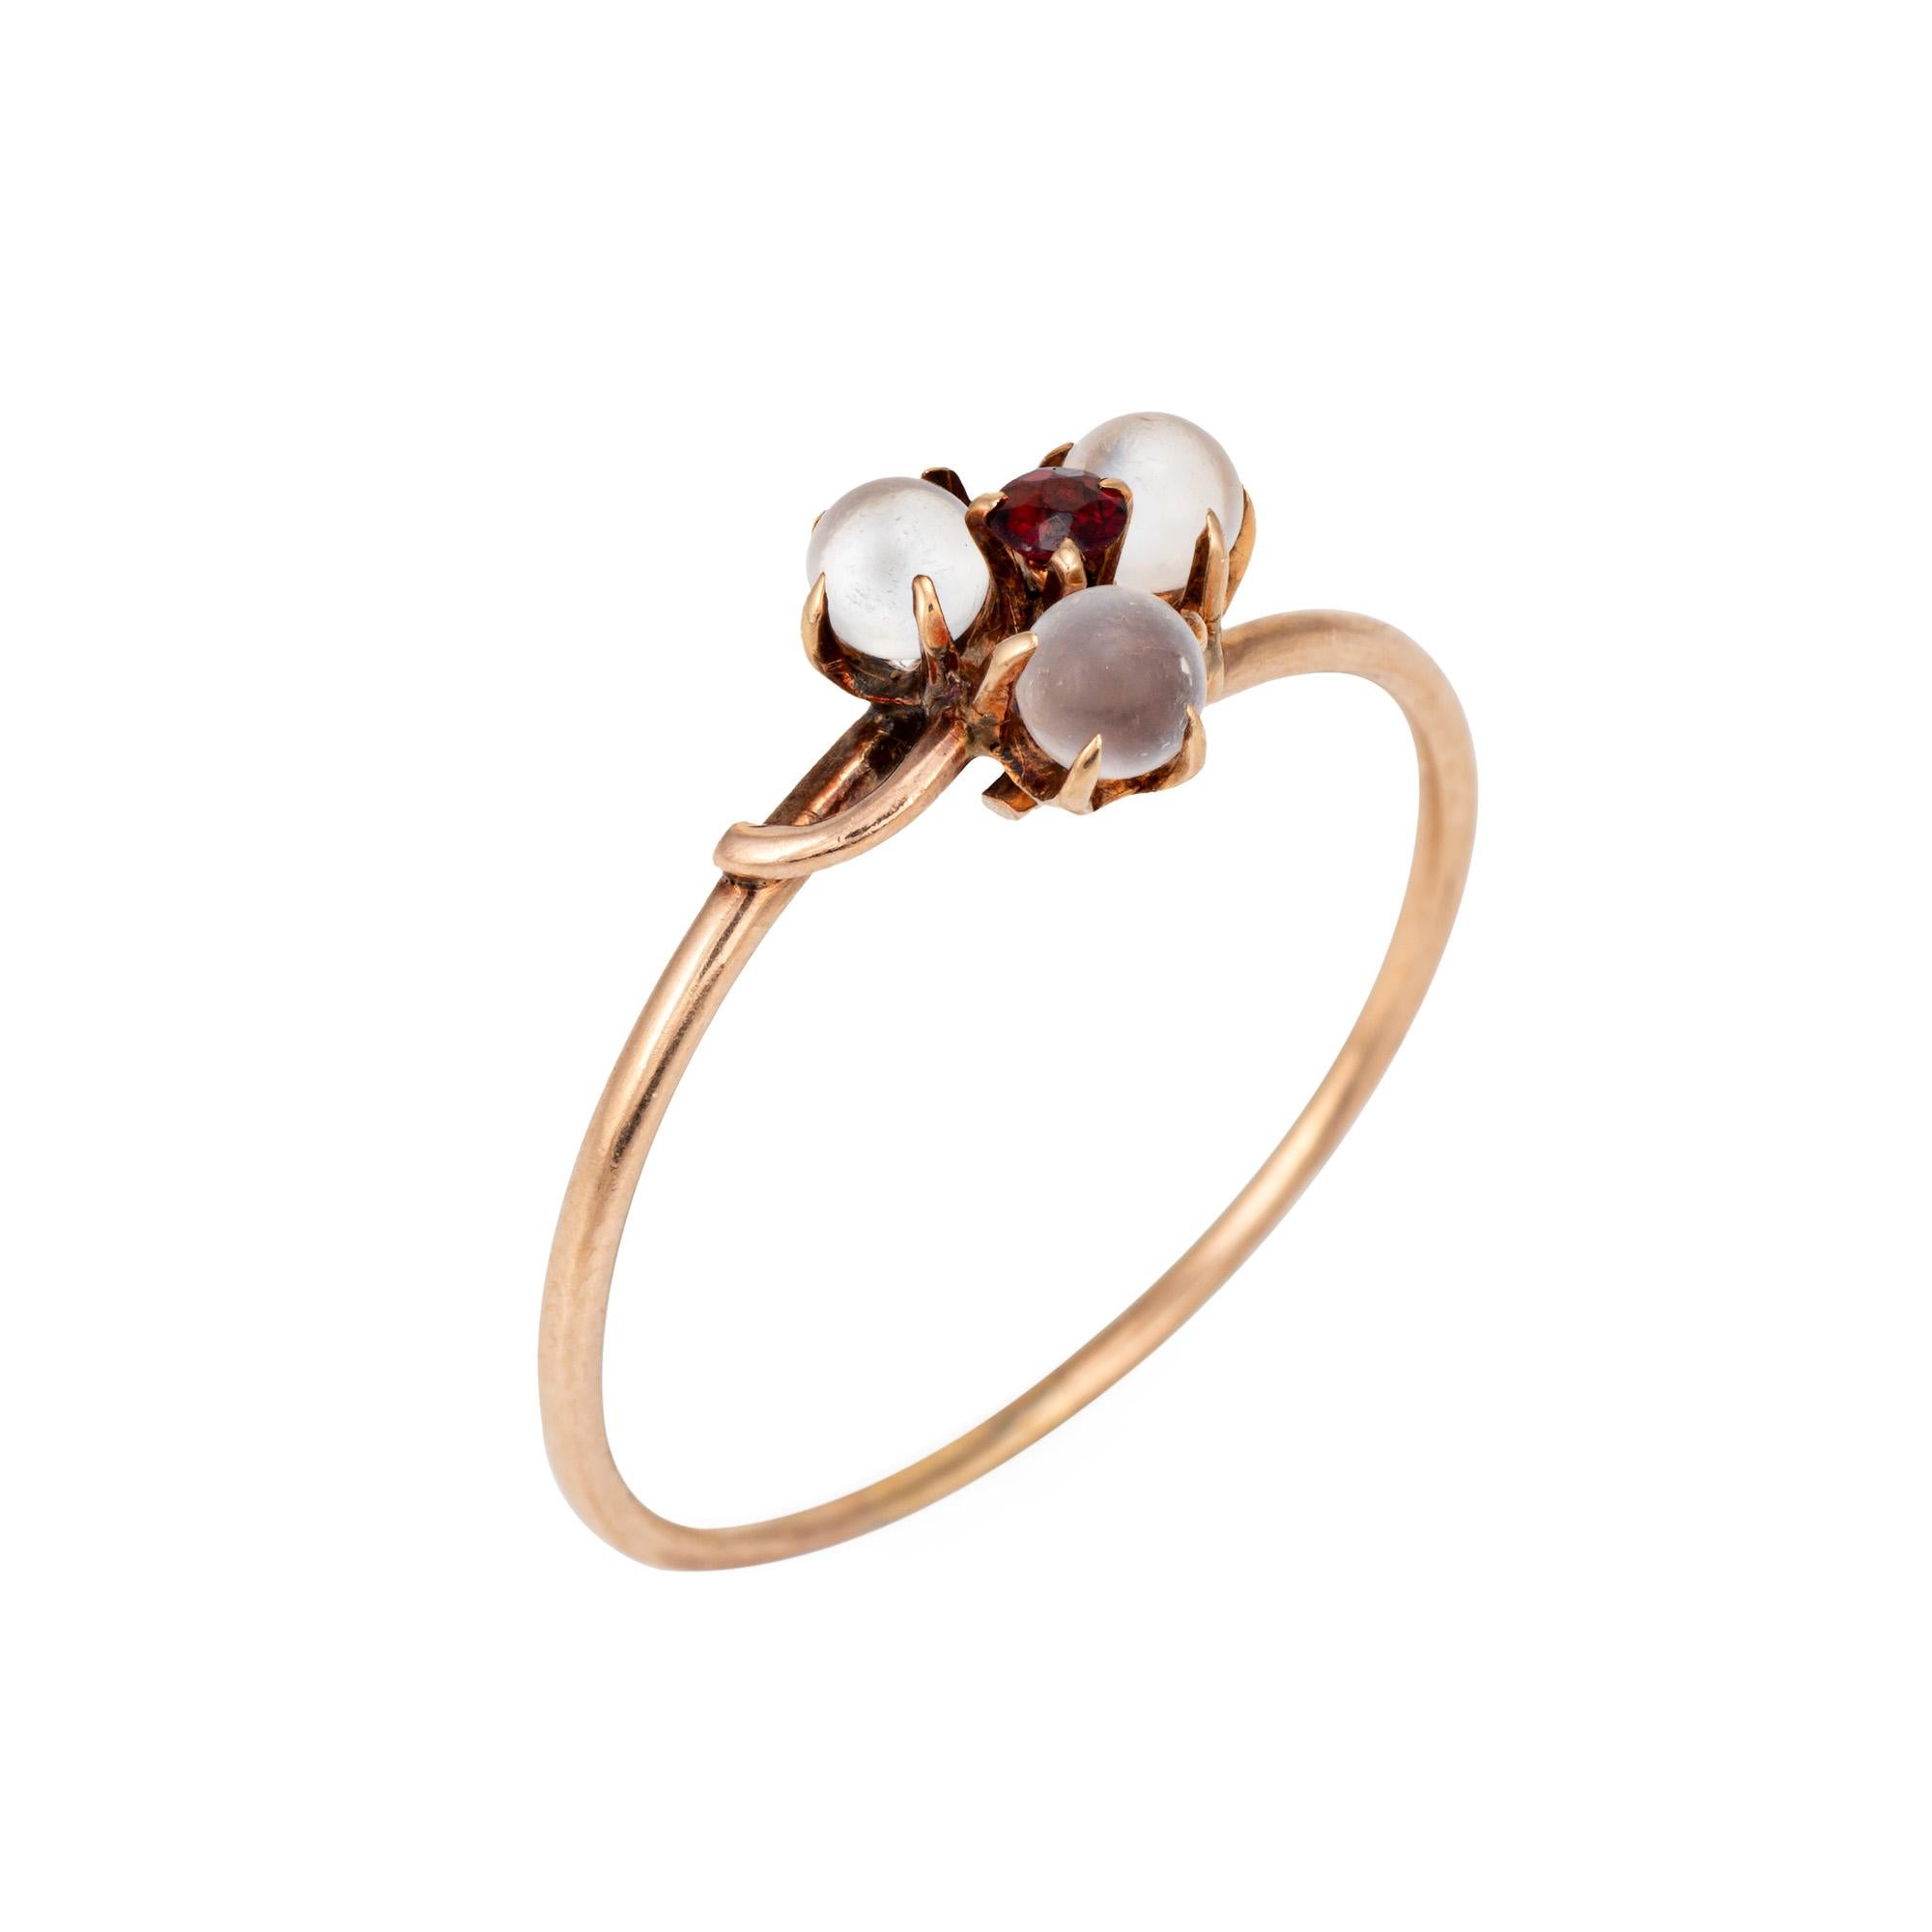 Finely detailed antique Victorian moonstone & garnet ring (circa 1880s to 1900s), crafted in 14 karat rose gold. 

Three moonstones measure 3mm each. One estimated 0.03 carat garnet is set to the center of the mount. The moonstones are in good